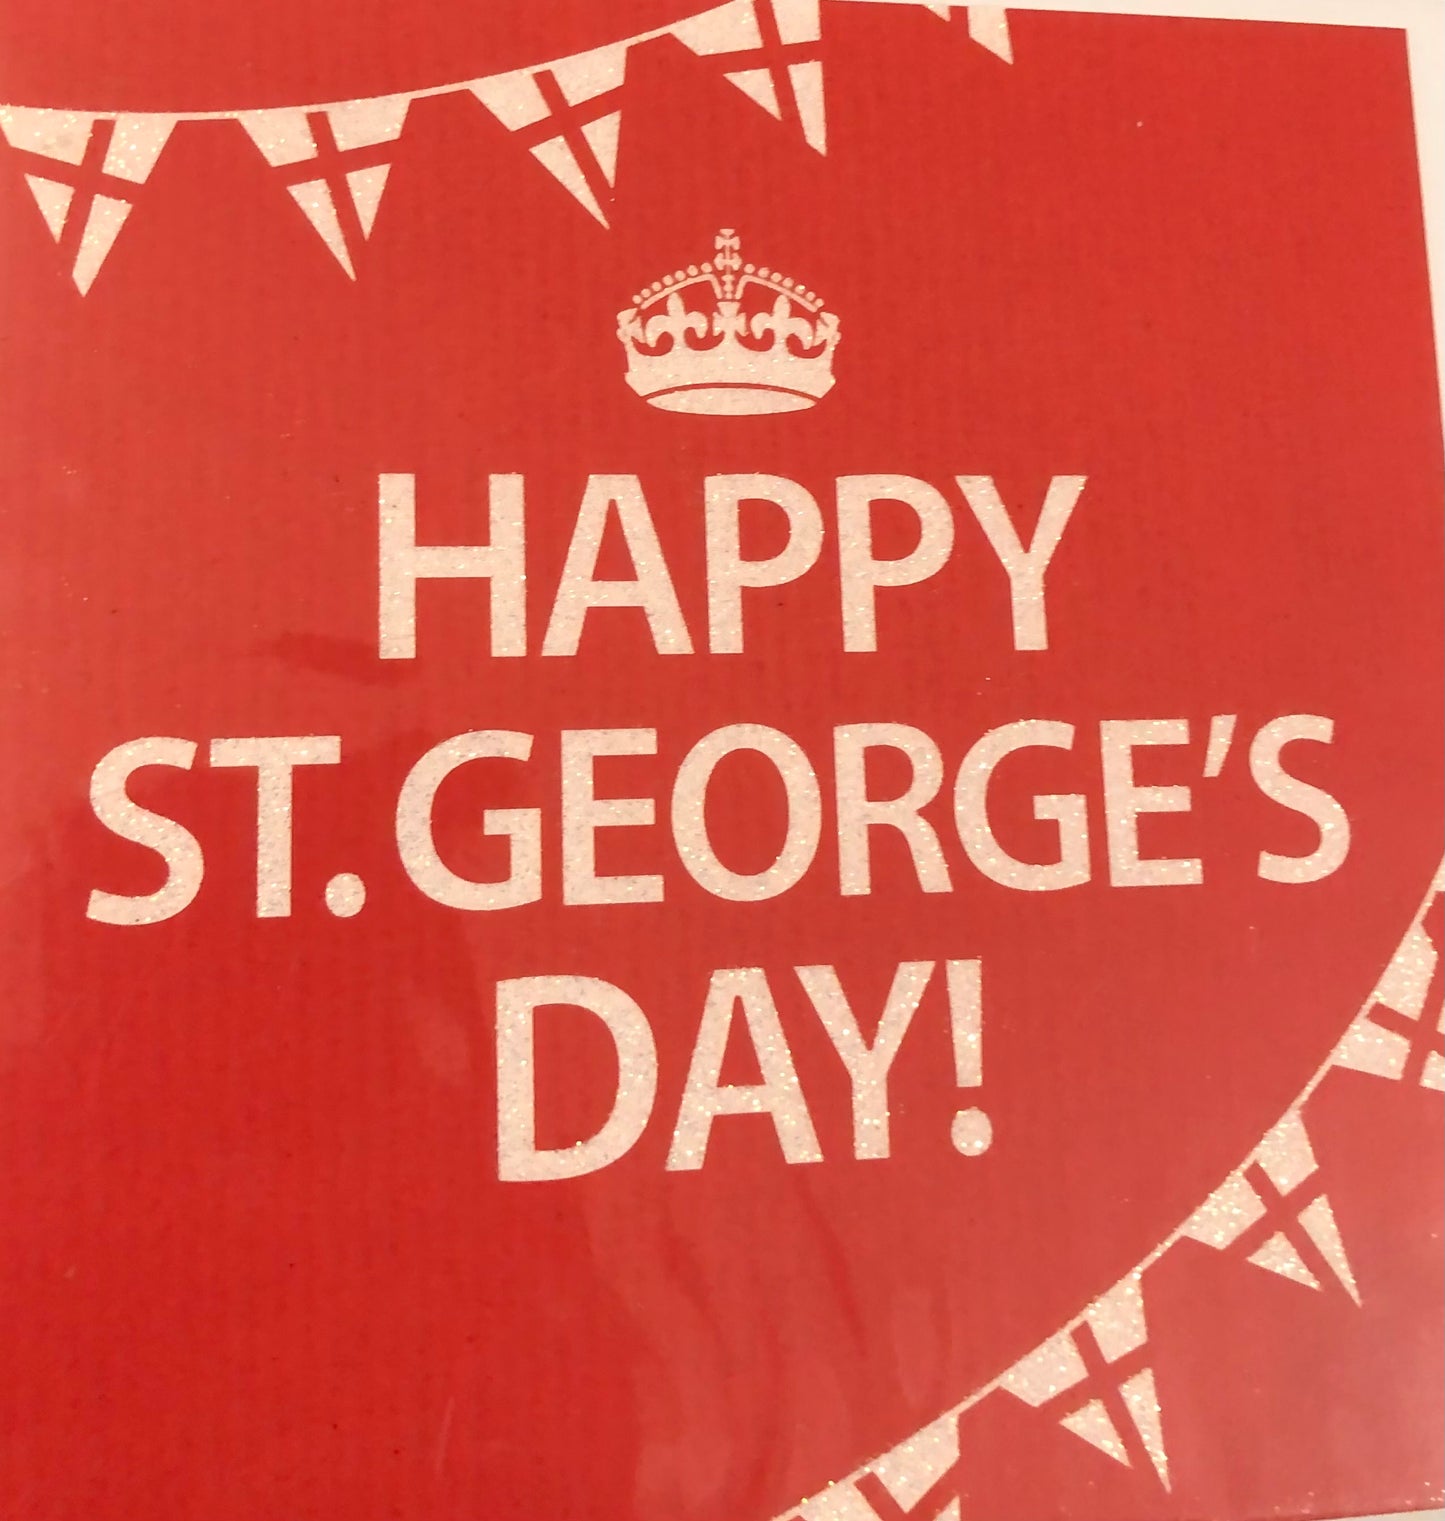 Happy St. George's Day (with flags).